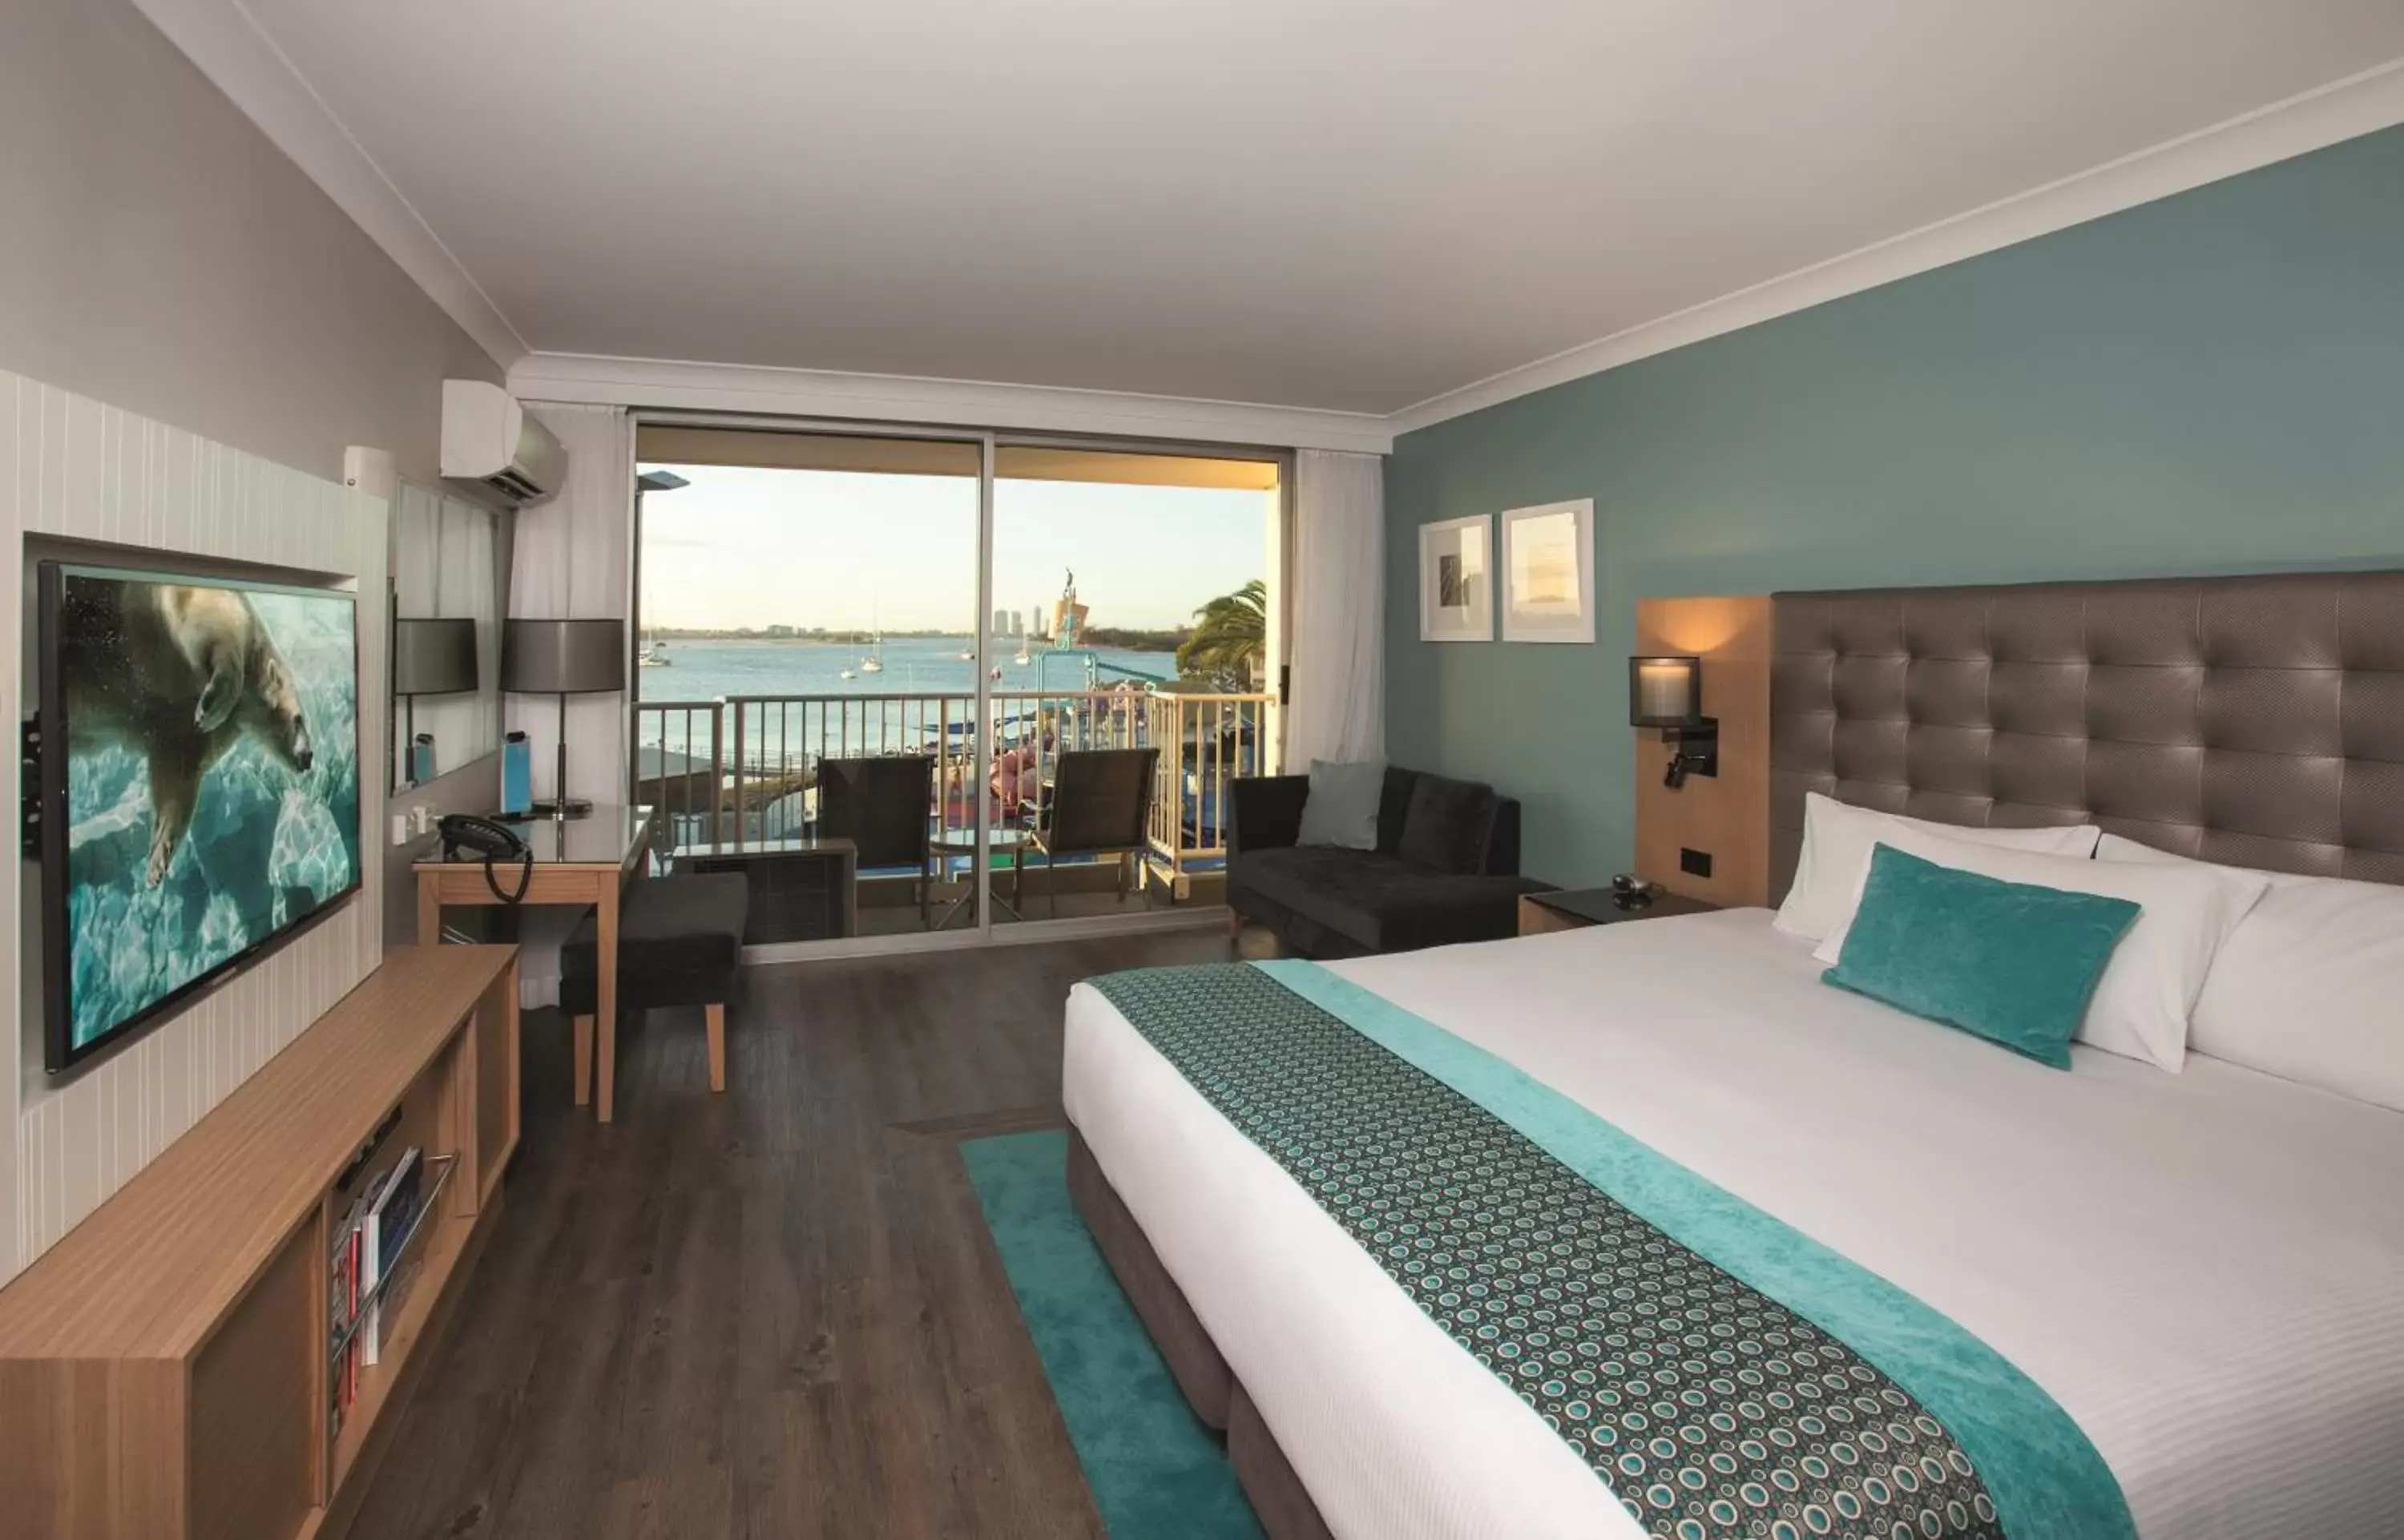 Premium King View Room + Entry to 3 Theme Parks in Sea World Resort